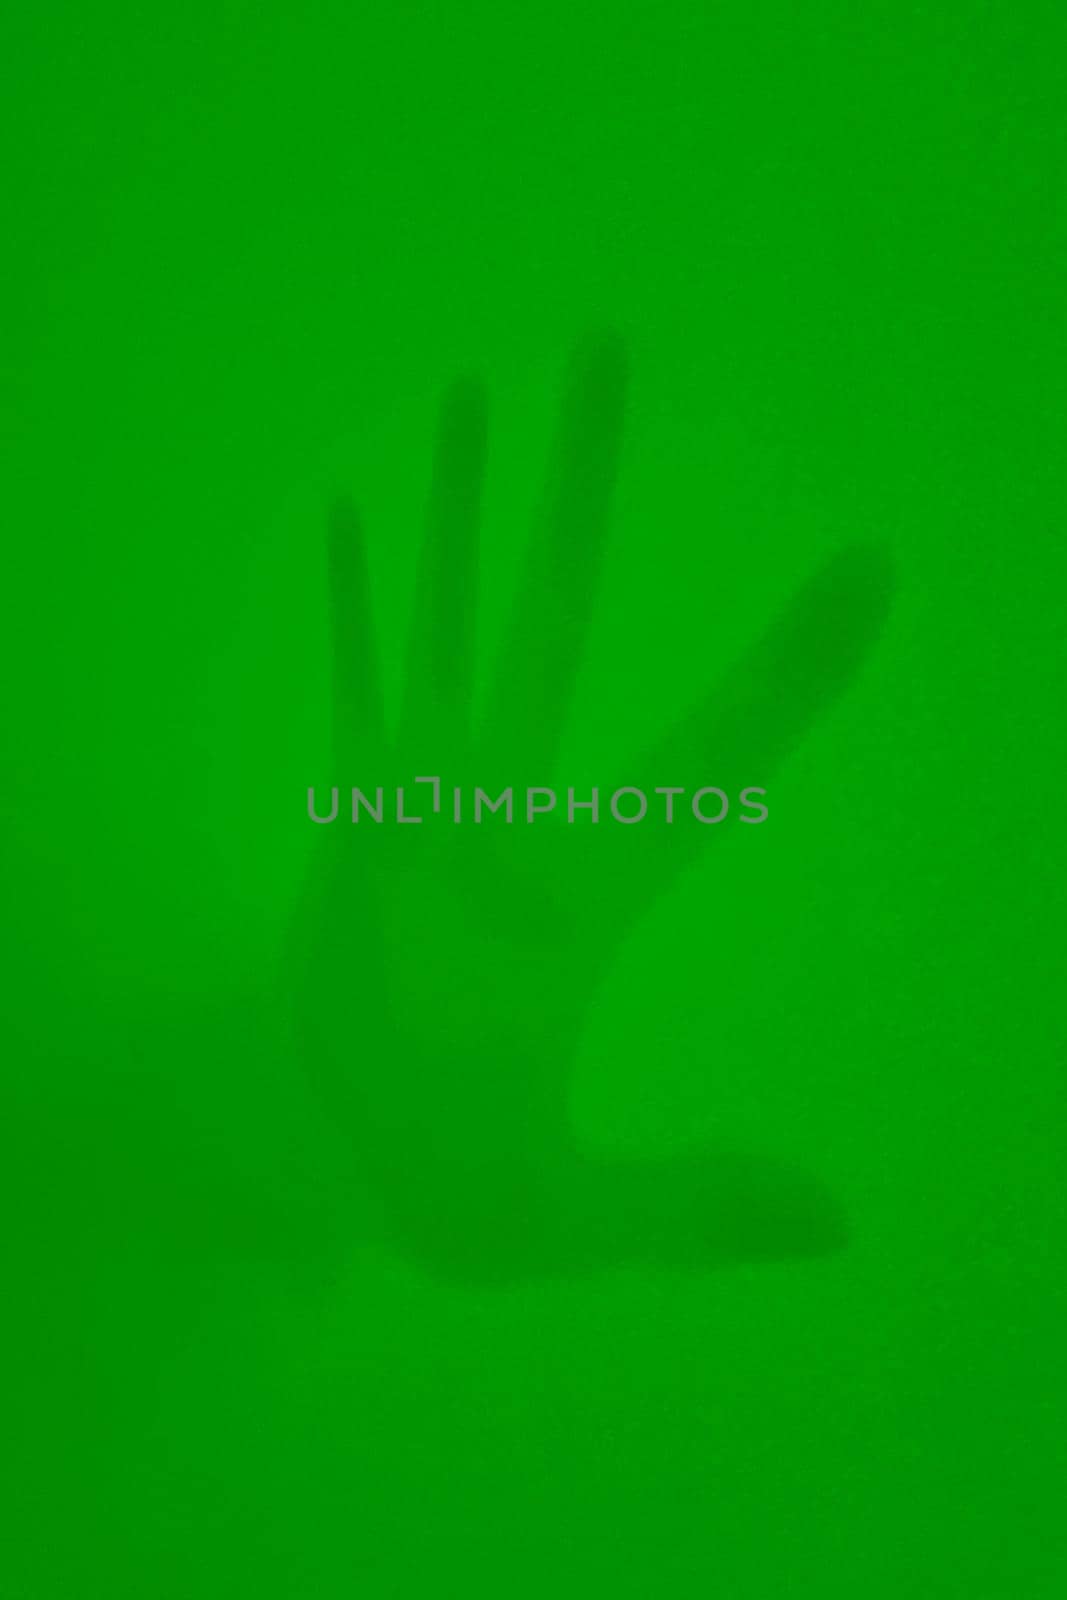 On a green background, the shadow of a man's hand. by kip02kas